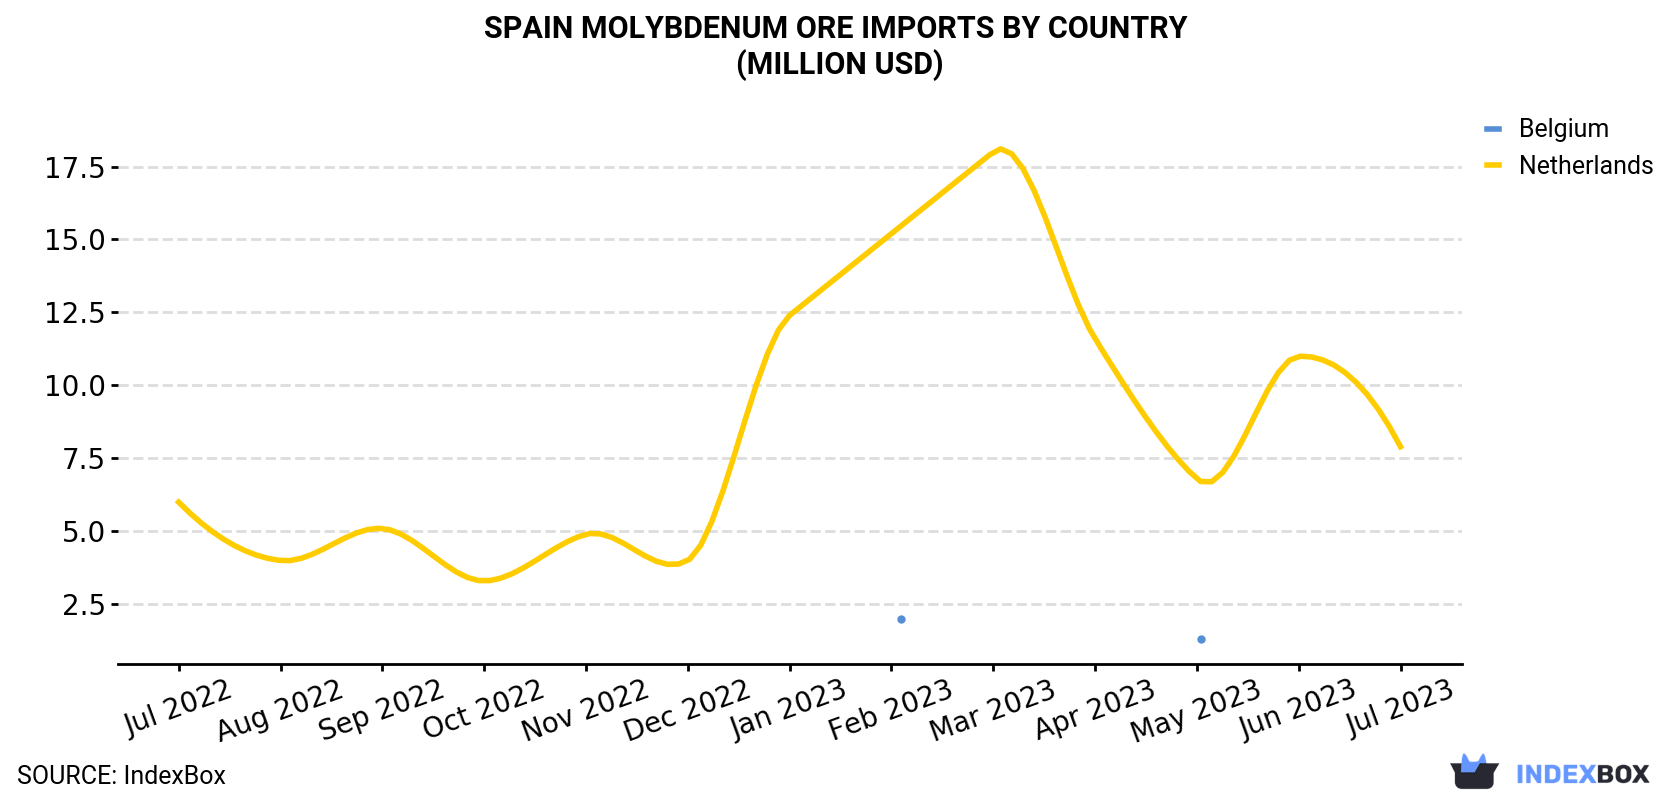 Spain Molybdenum Ore Imports By Country (Million USD)